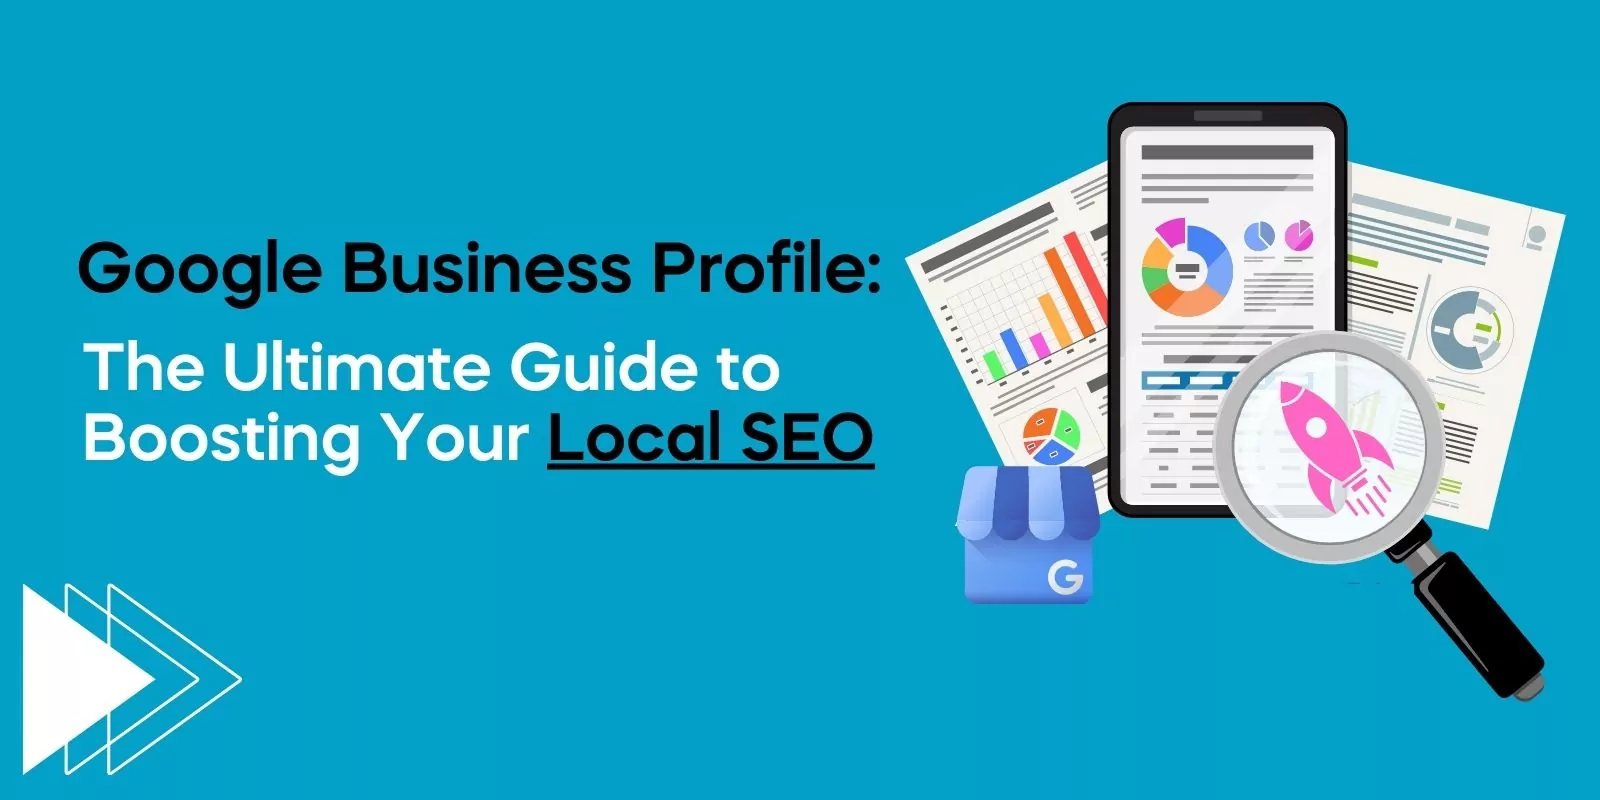 Google Business Profile-The Ultimate Guide to Boosting Your Local SEO